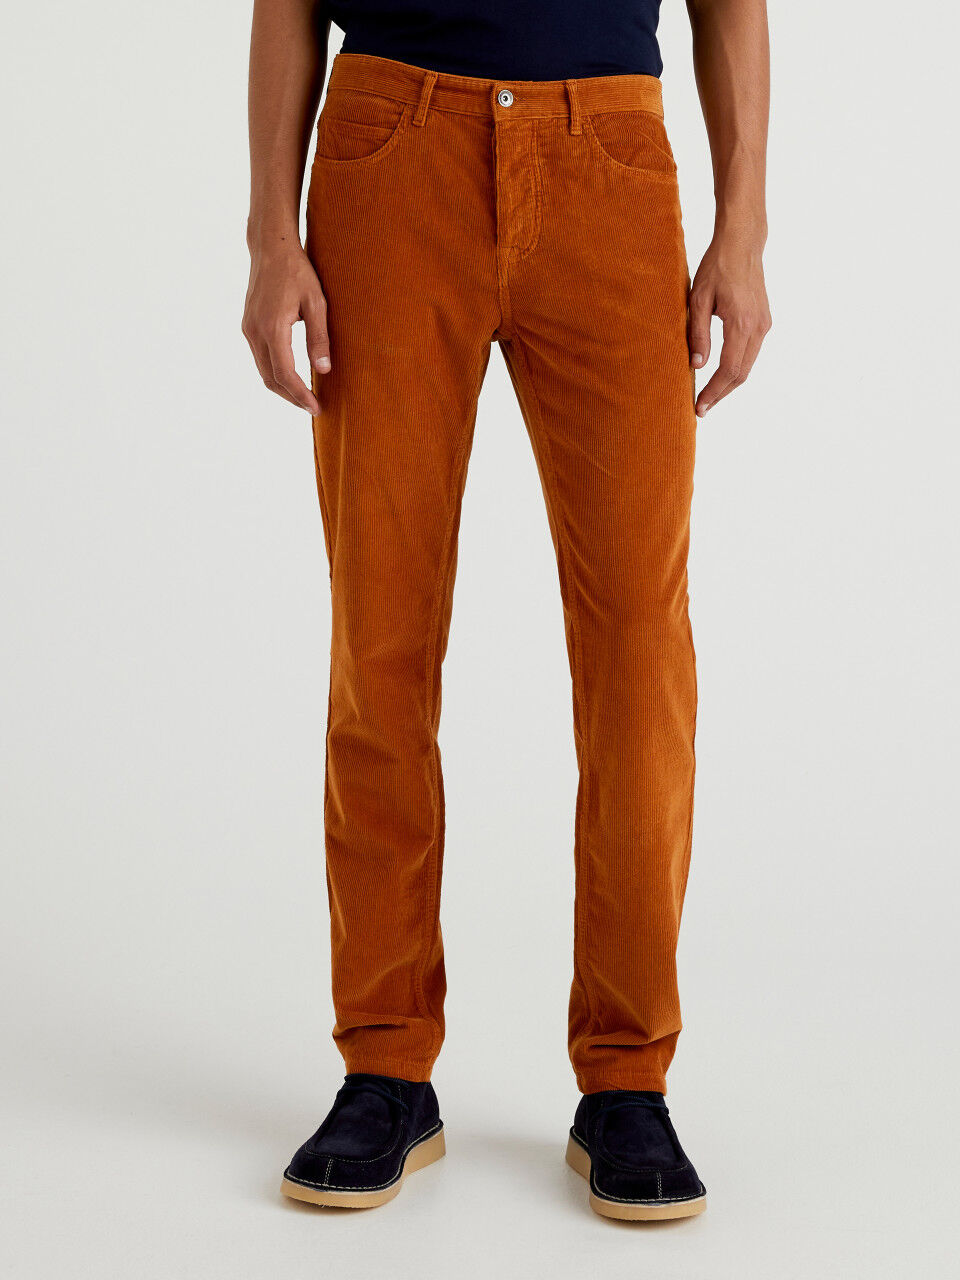 Buy Orange Trousers & Pants for Men by The Indian Garage Co Online |  Ajio.com